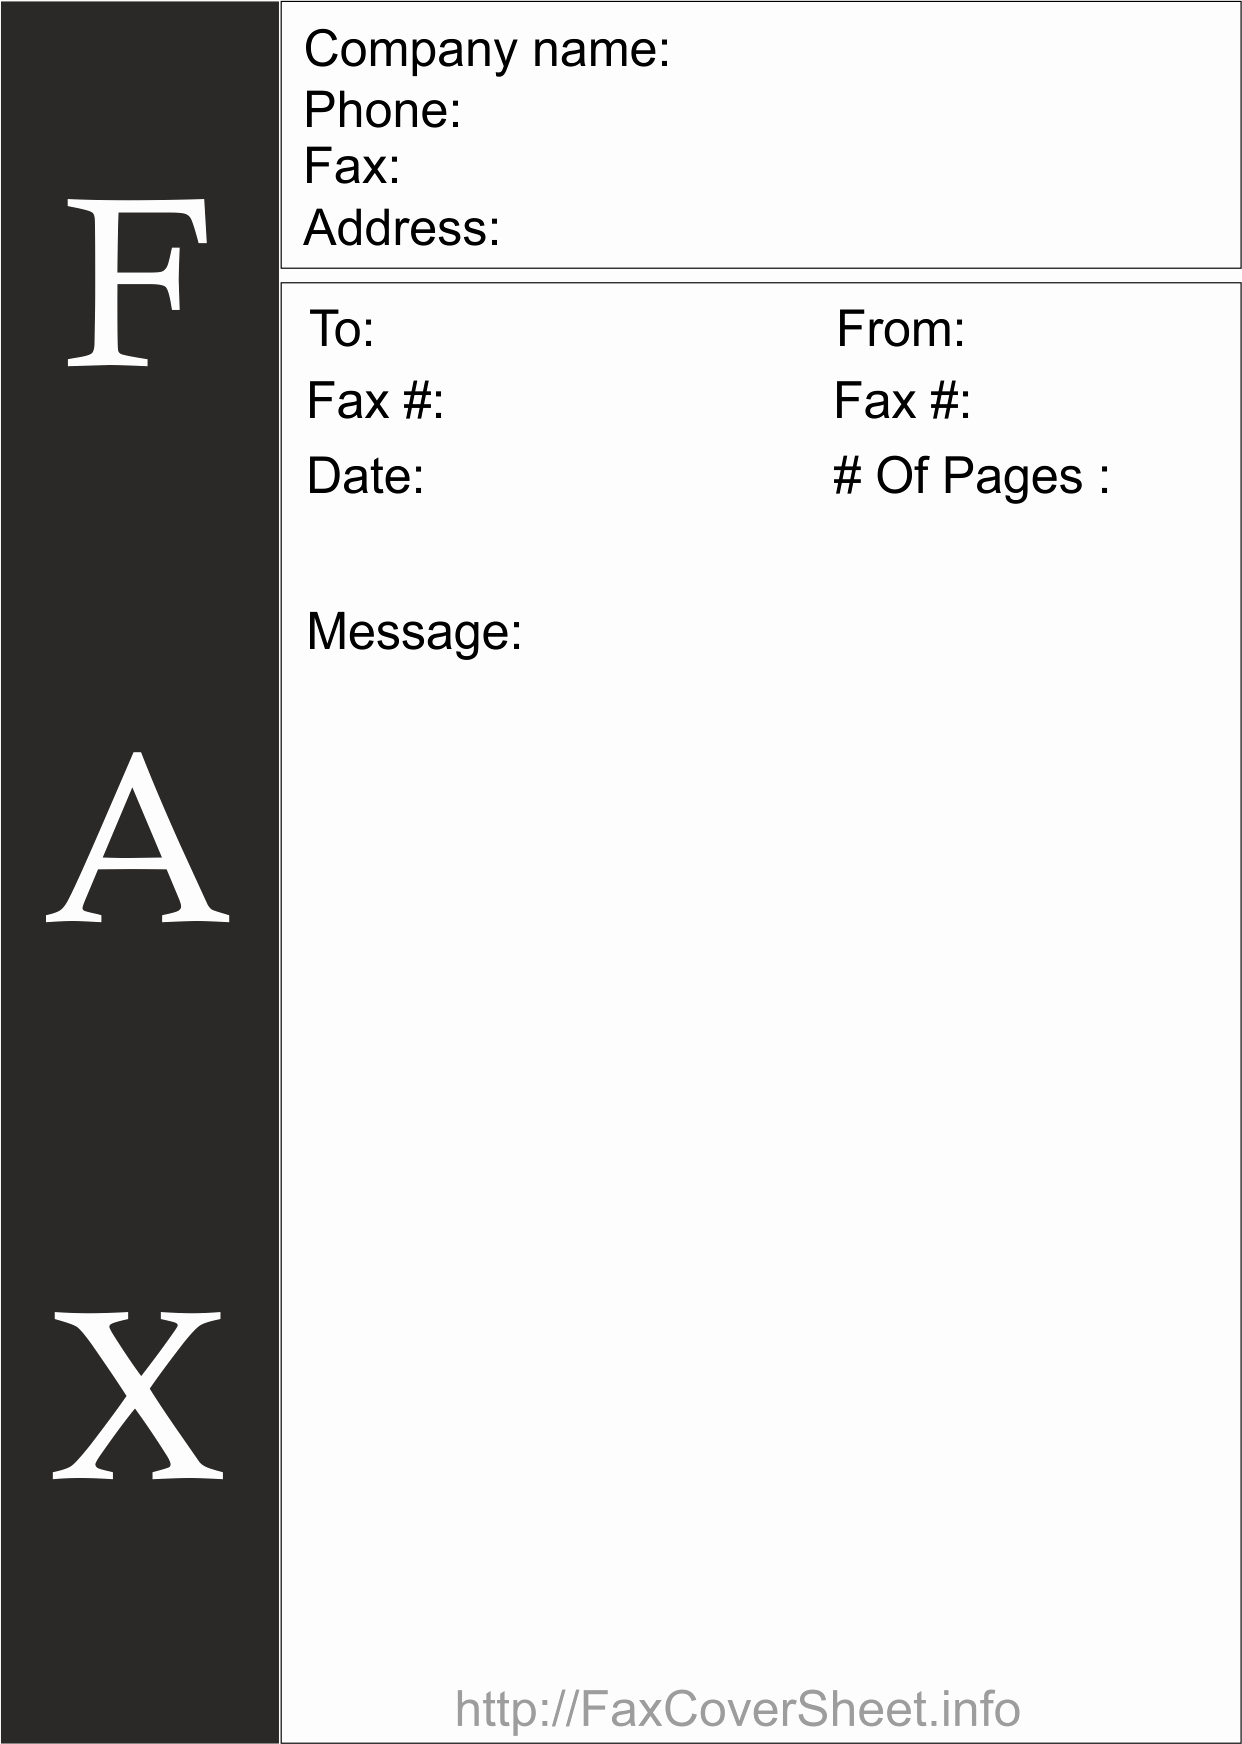 Microsoft Word Fax Cover Sheet Fresh How to Find Blank Fax Cover Sheet within Microsoft Word